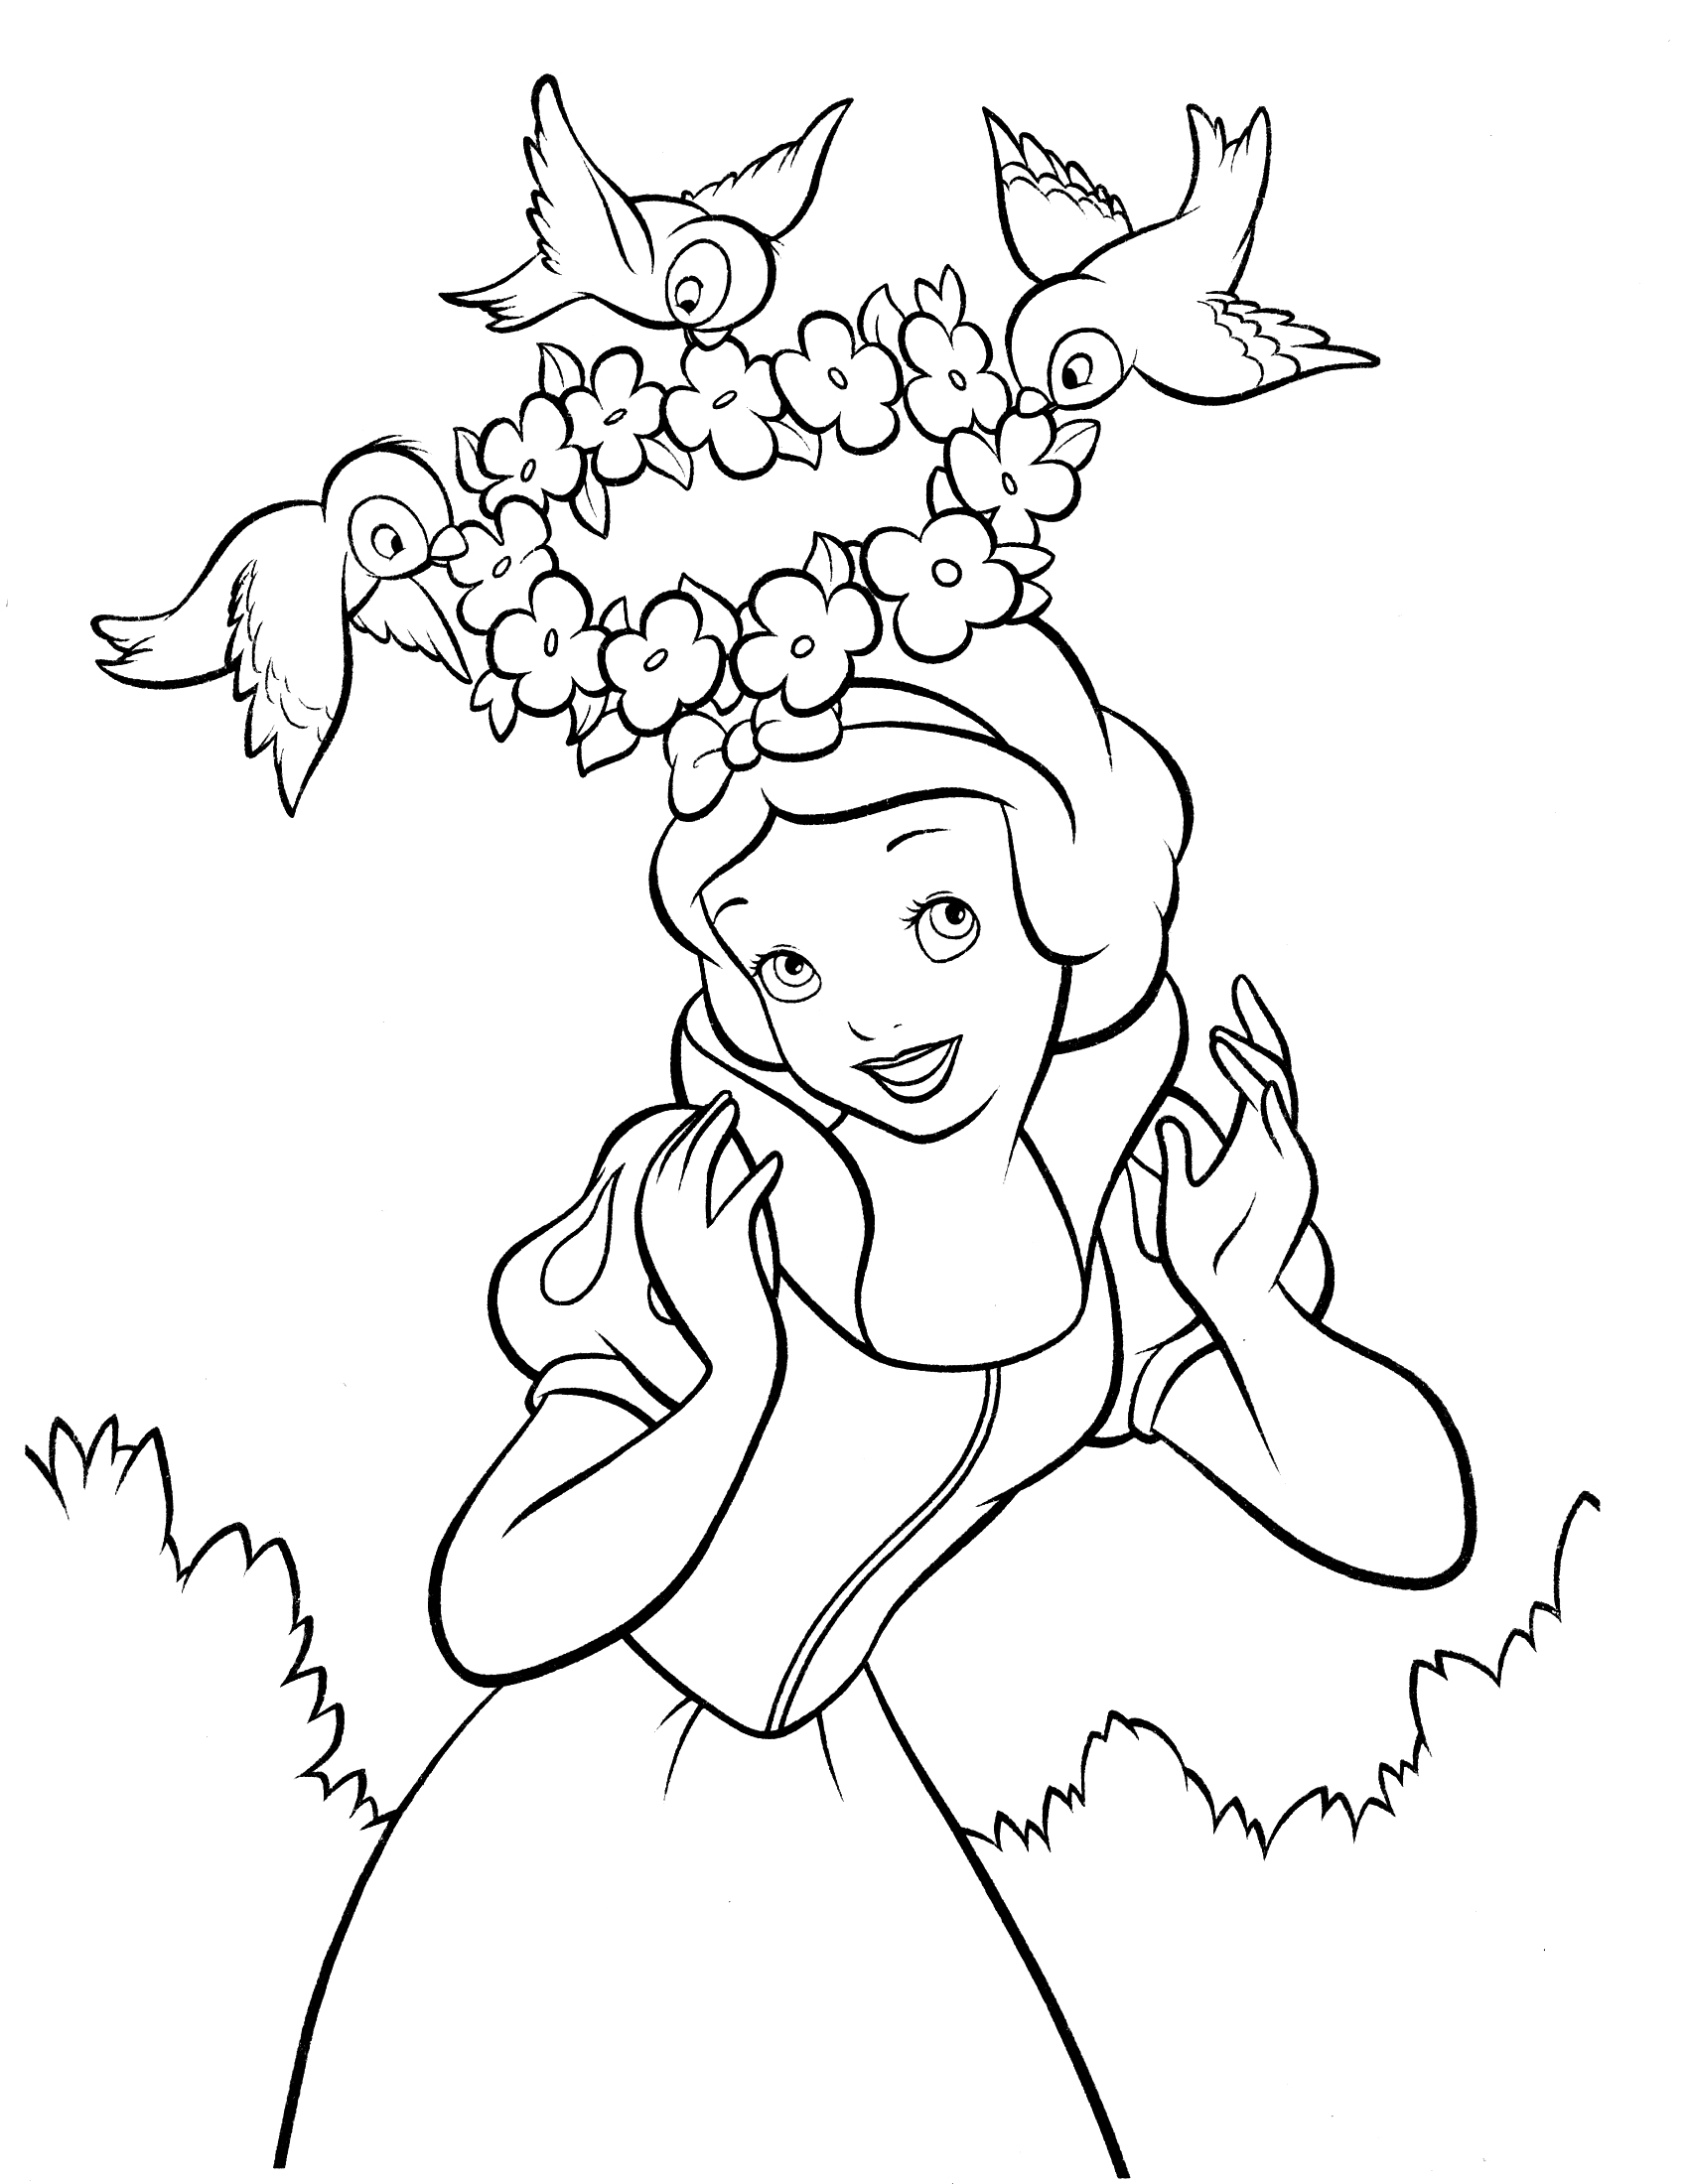 Snow White Coloring Pages   Best Coloring Pages For Kids